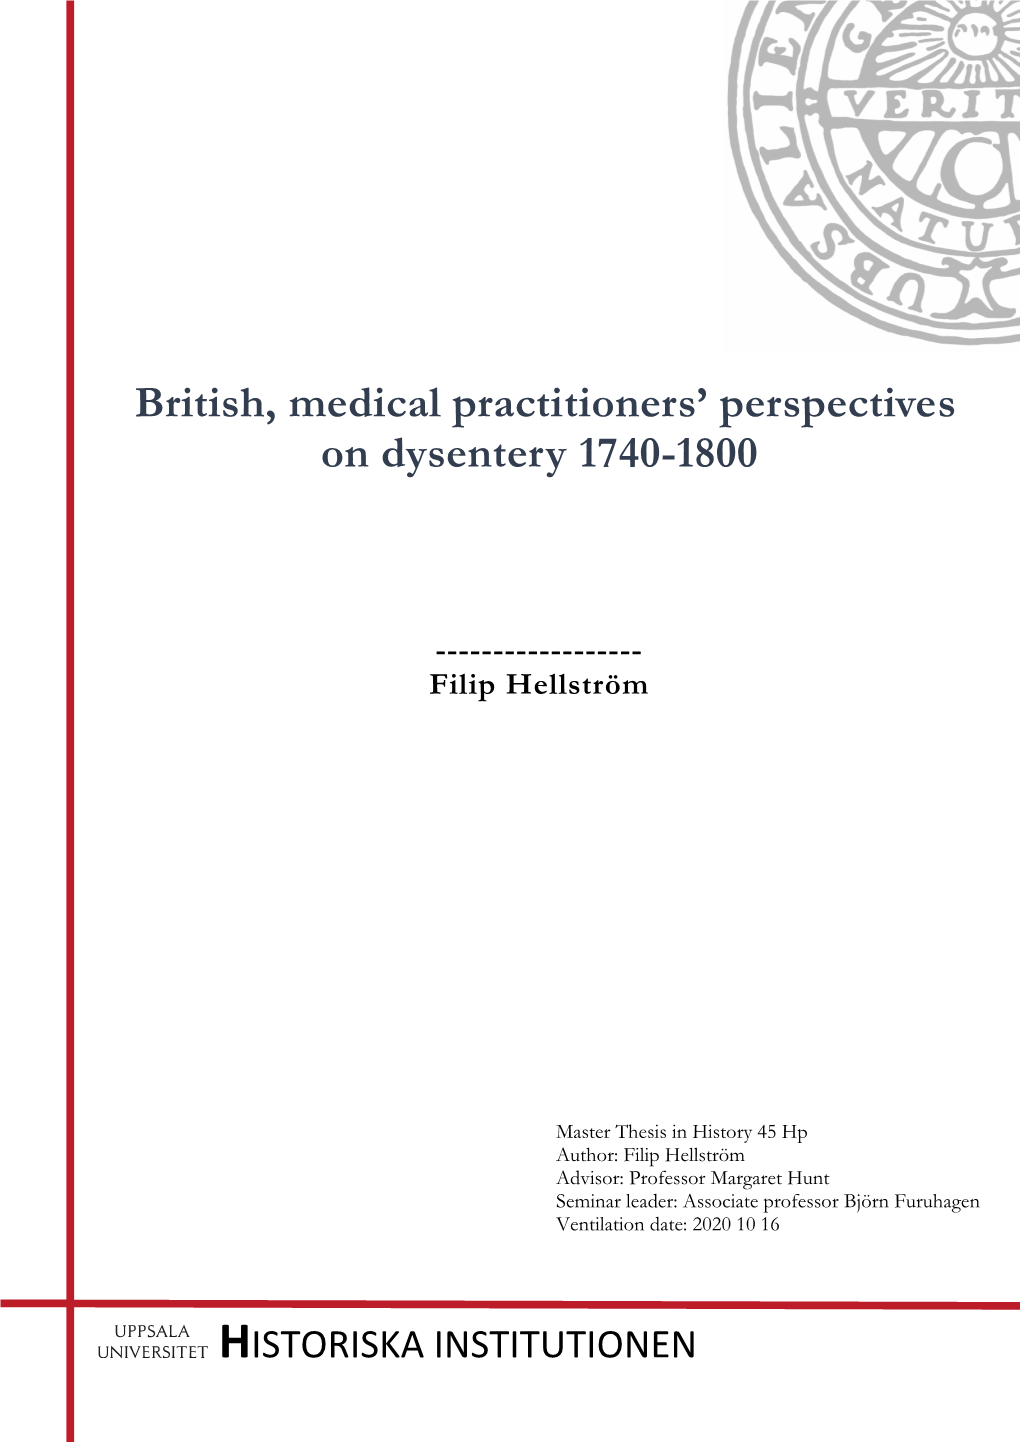 British, Medical Practitioners' Perspectives on Dysentery 1740